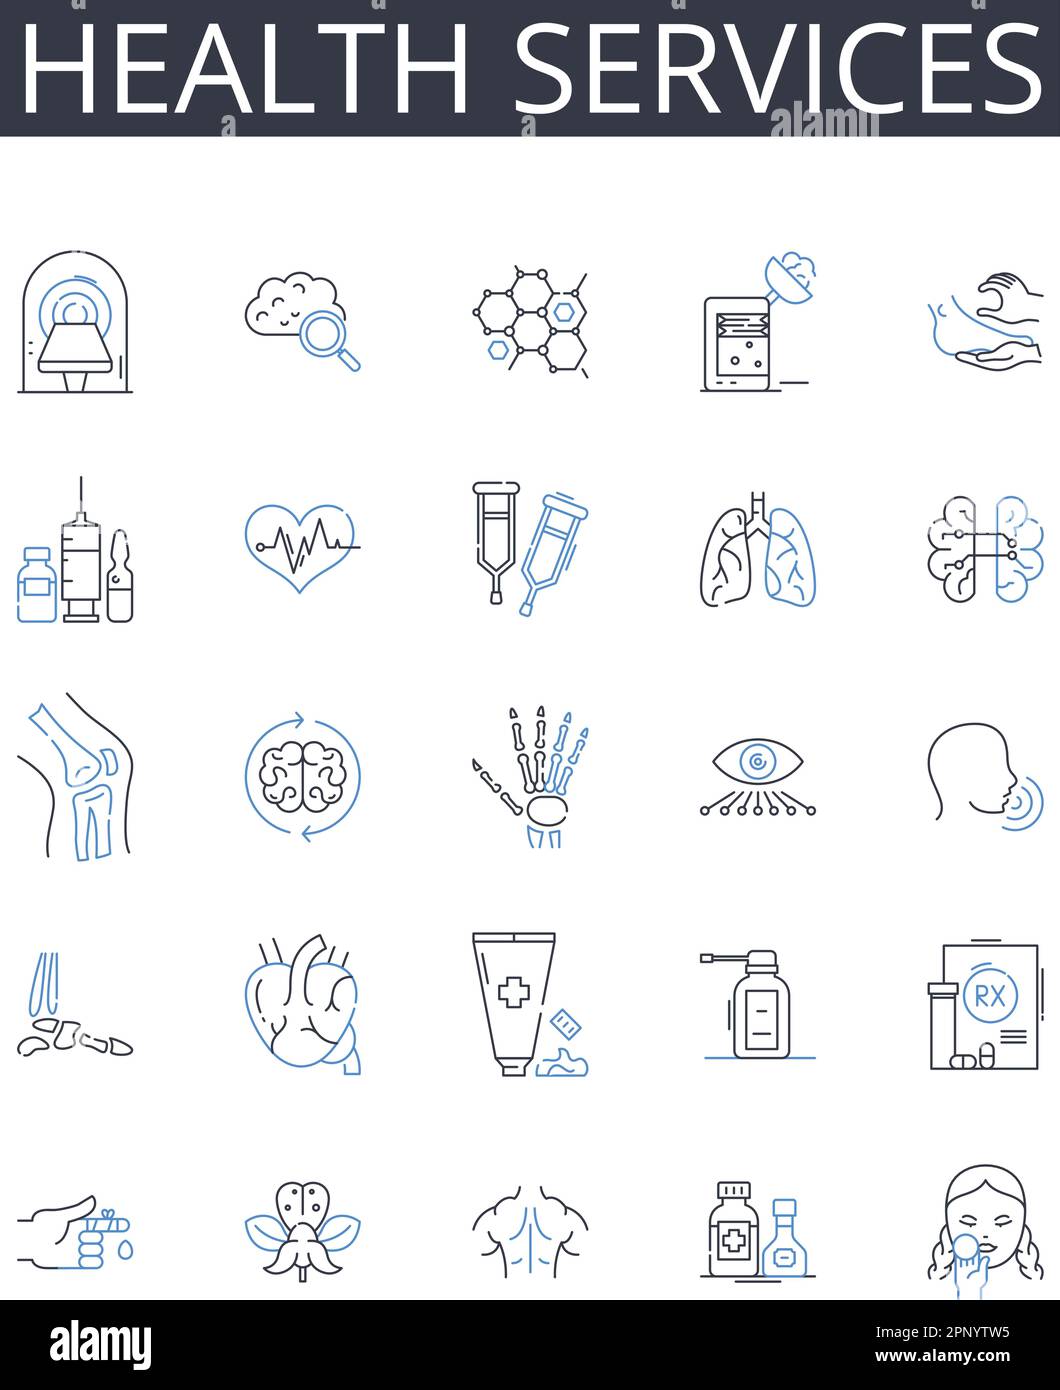 Health services line icons collection. Medical care, Wellness facilities, Healthcare institutions, Physical therapy, Healthcare providers, Holistic Stock Vector